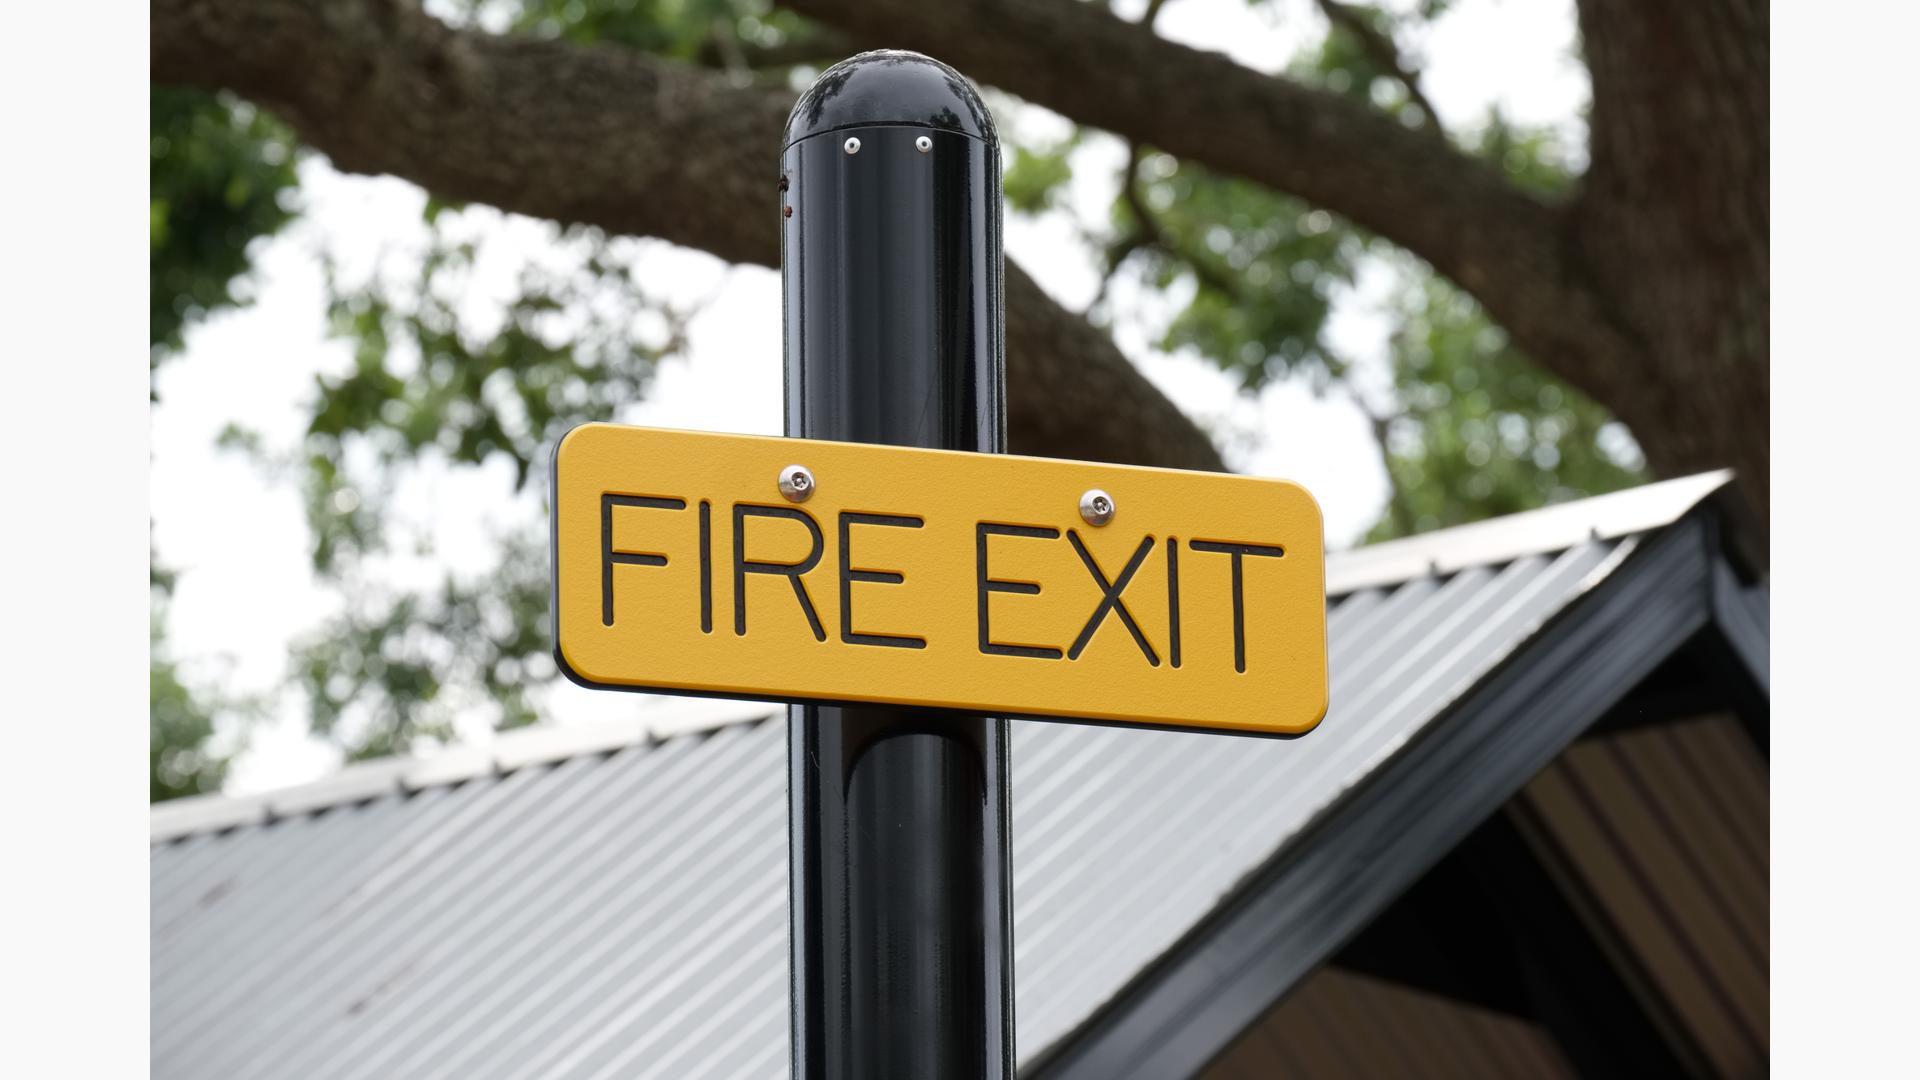 Detail of custom "Fire Exit" signage for play structure.